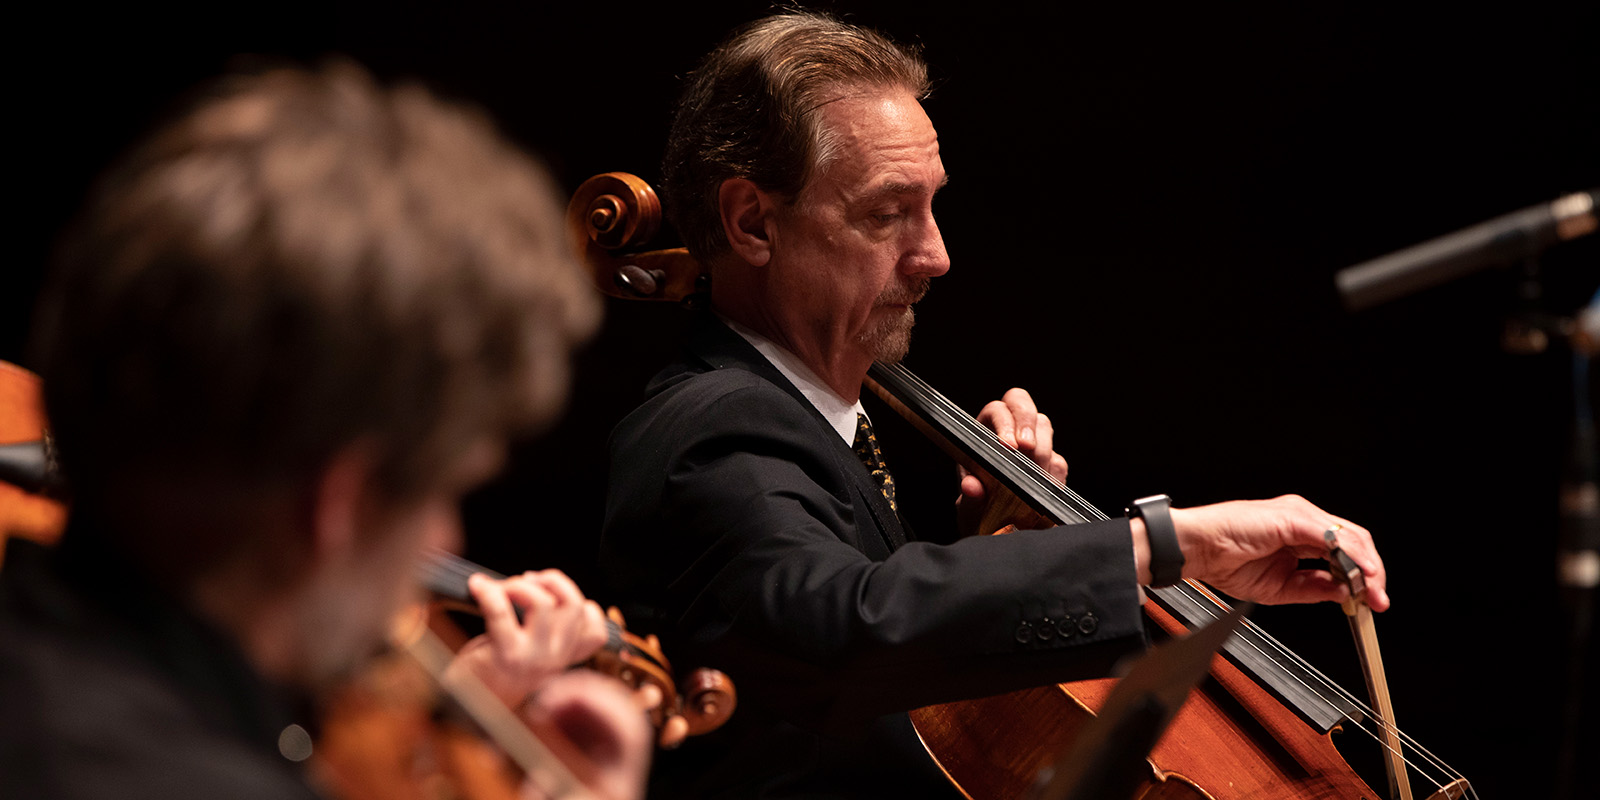 Chamber Music Society Of Lincoln Center Celebrates The Music And Legacy Of Brahms April 23